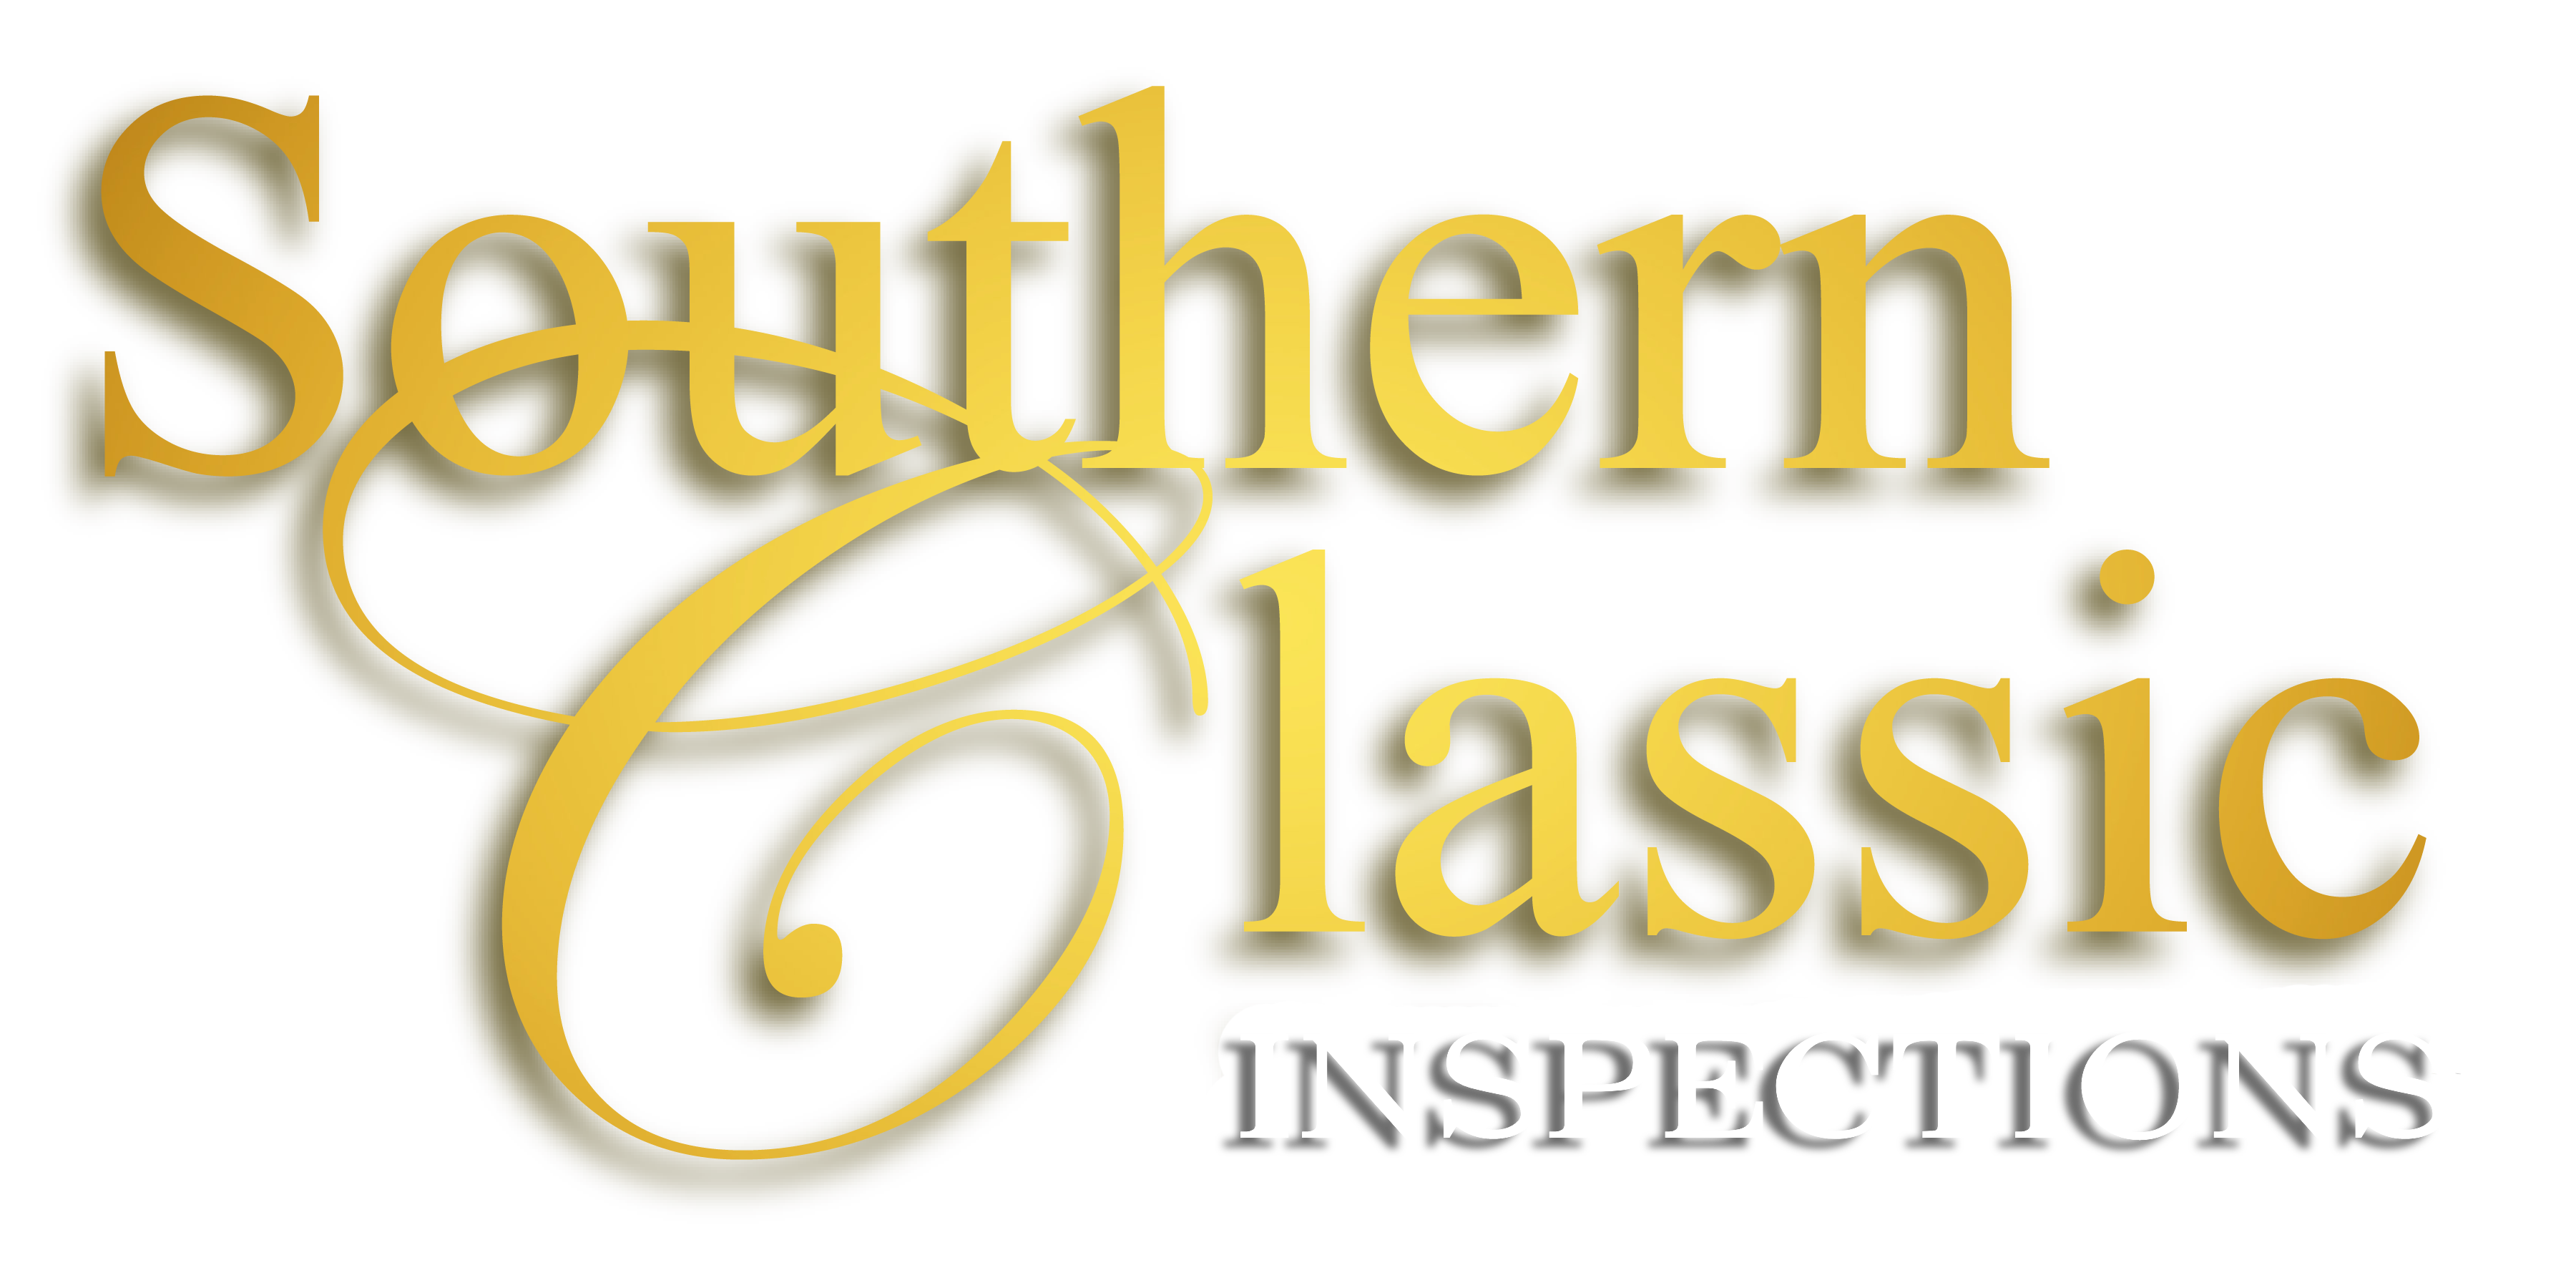 Southern Classic Inspections